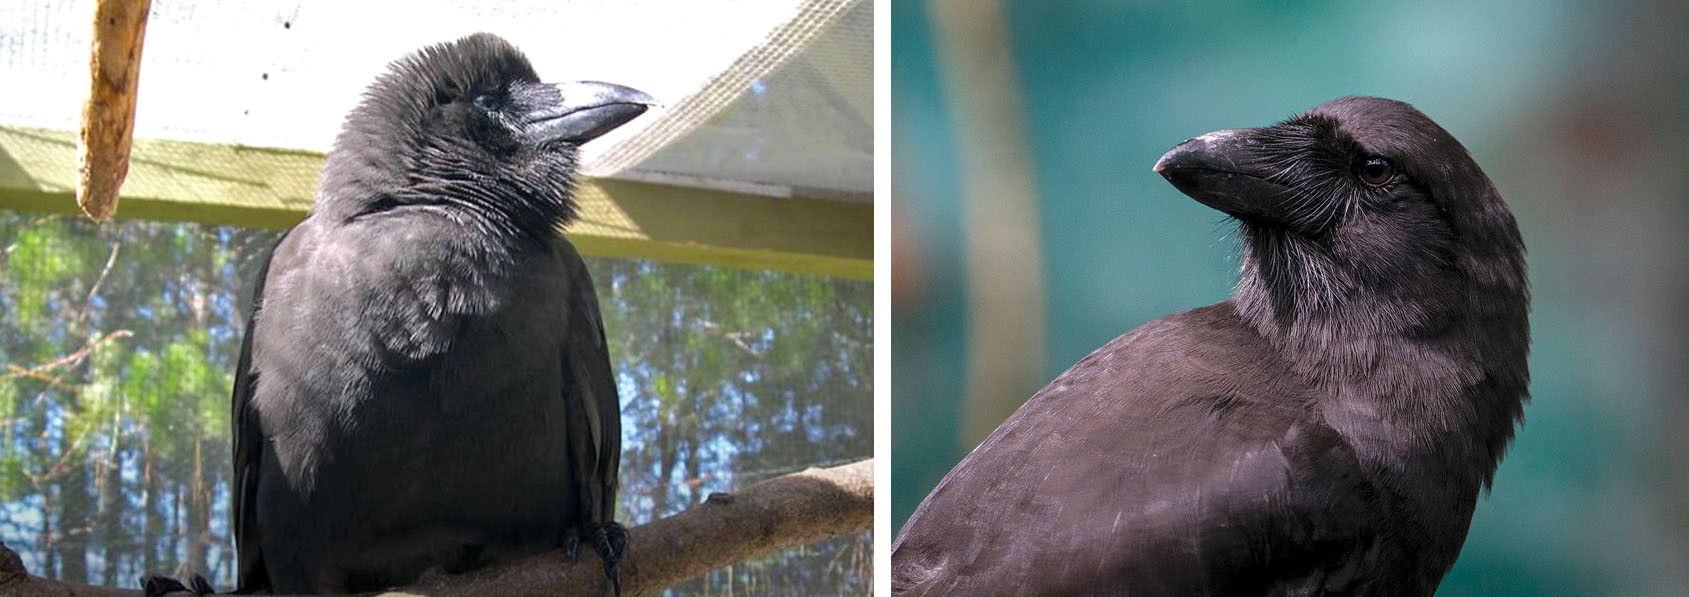 Right: Full-grown adult ‘alalā in conservation facility. photo courtesy of San Diego Zoo Institute for Conservation Research. Right: The ‘alalā, with matte-black feathers and large bill. photo courtesy of San Diego Zoo Global